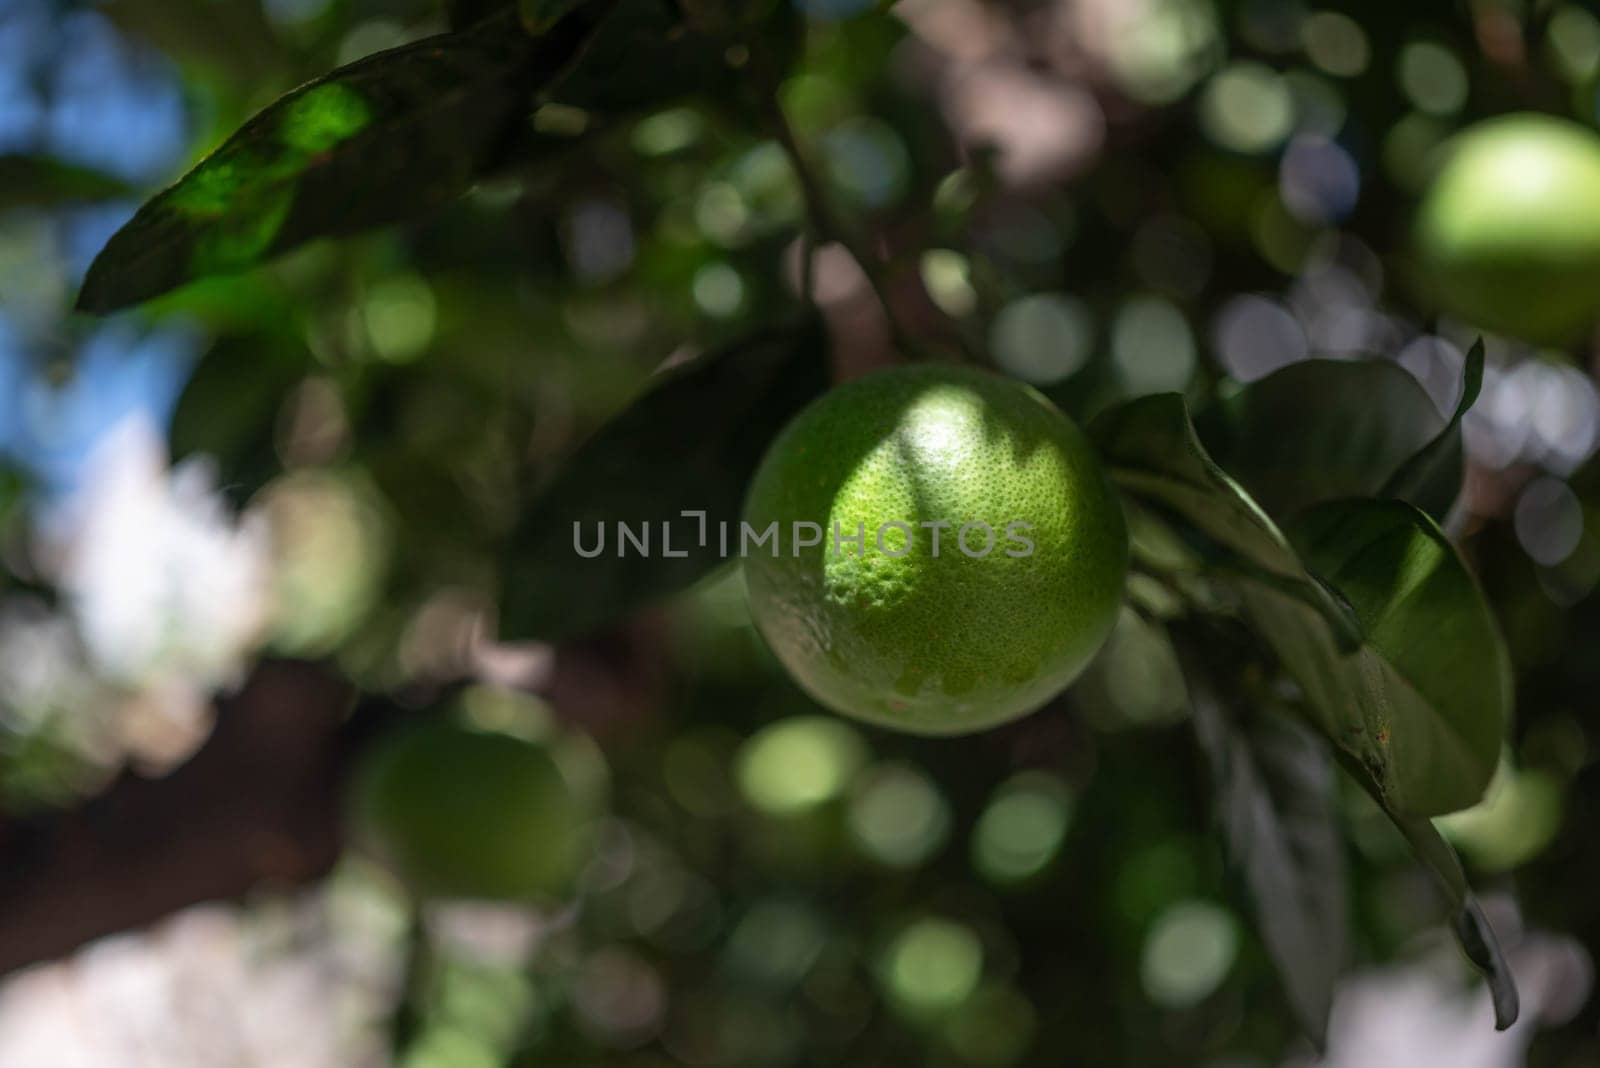 Green lemons growing on a tree. Citrus fruit on green leaves background on a sunny day. Sun glare and bokeh effect. Concept of organic food, orchard and agriculture. Lemon closeup